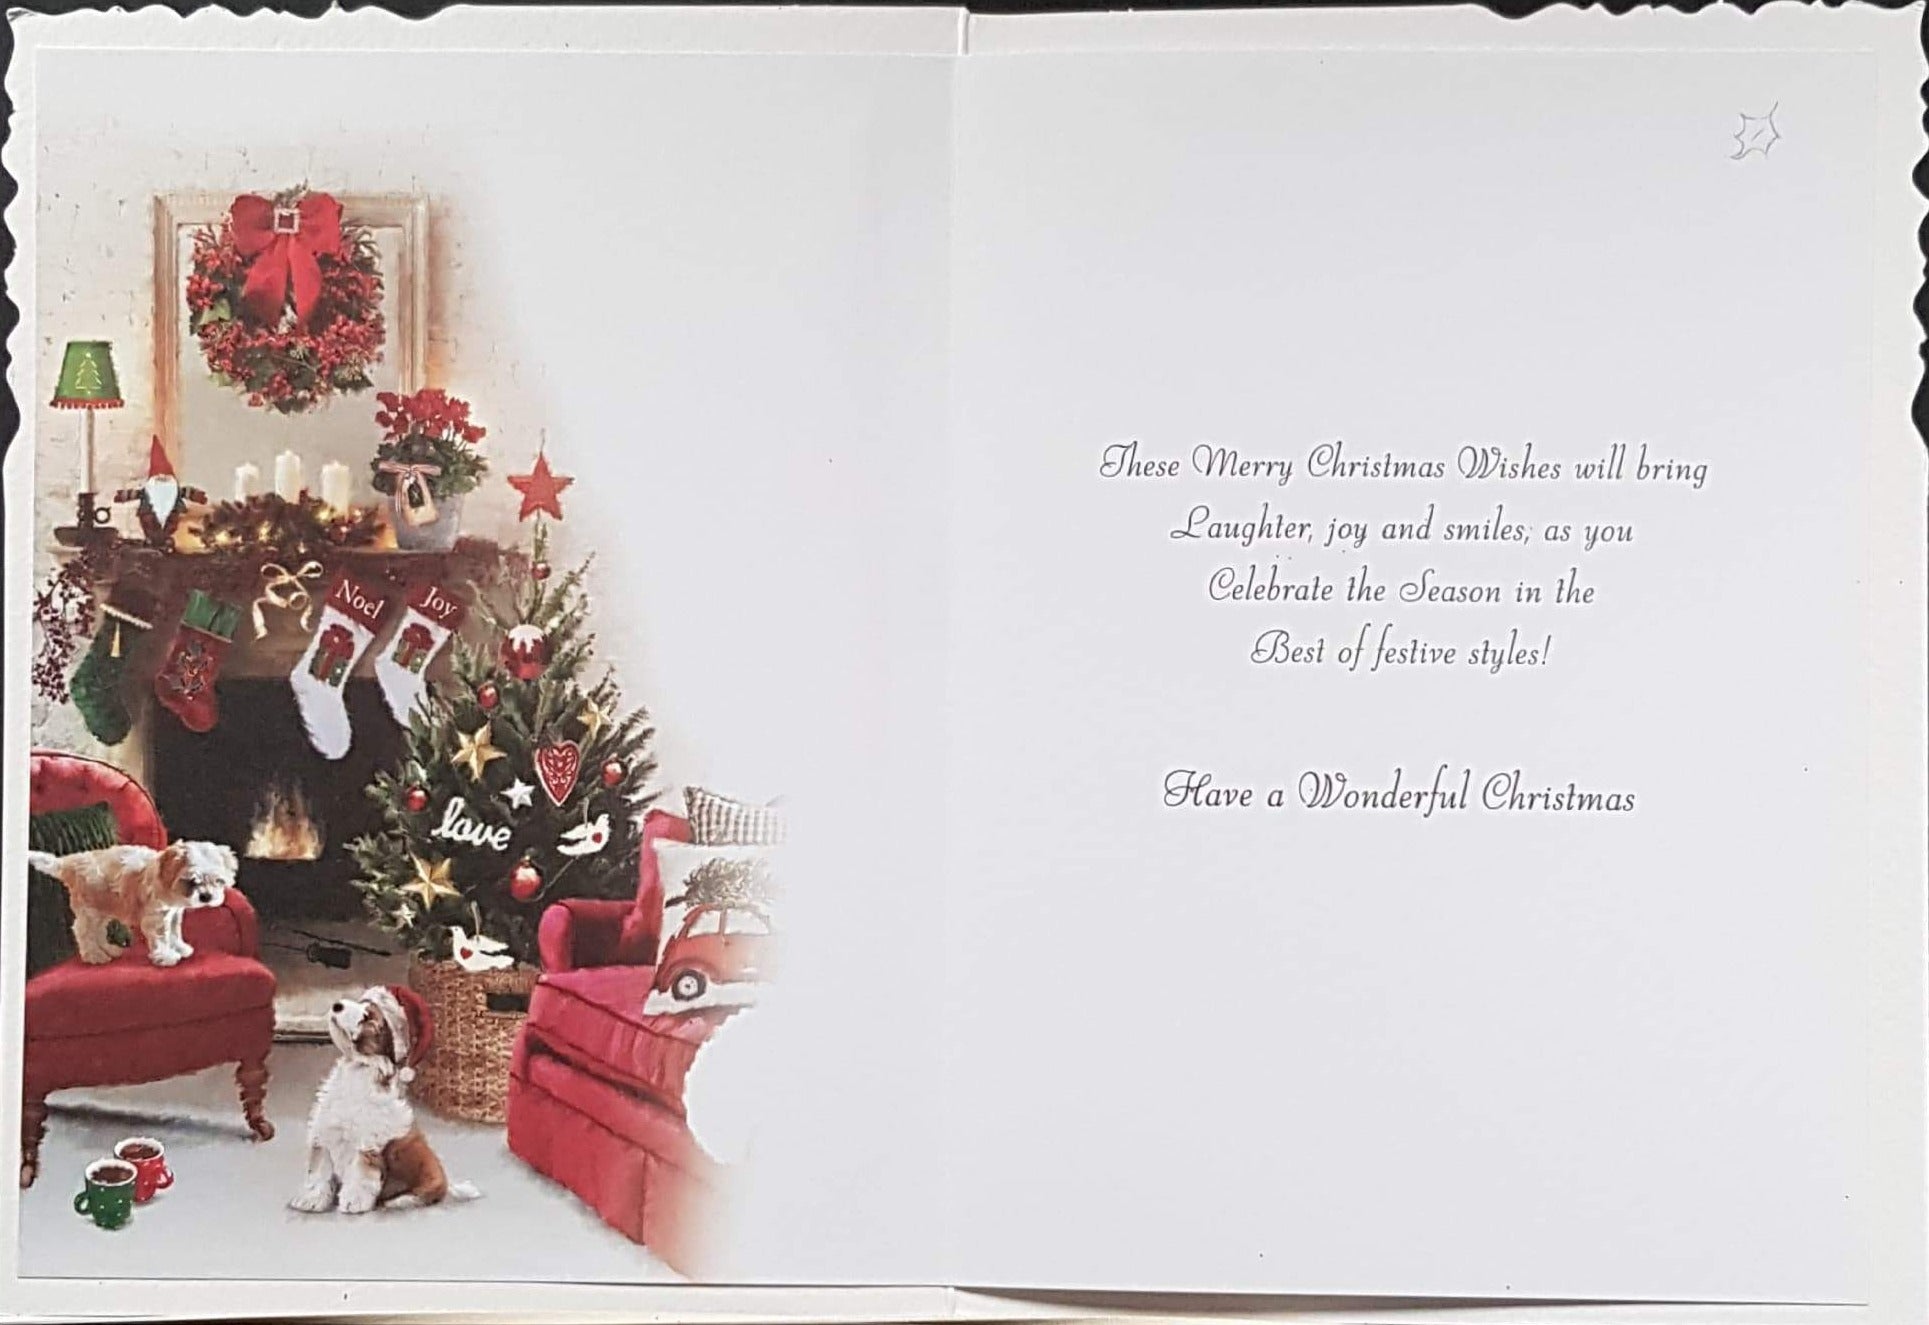 General Christmas Card - At This Festive Time & Puppies in Decorated Living Room